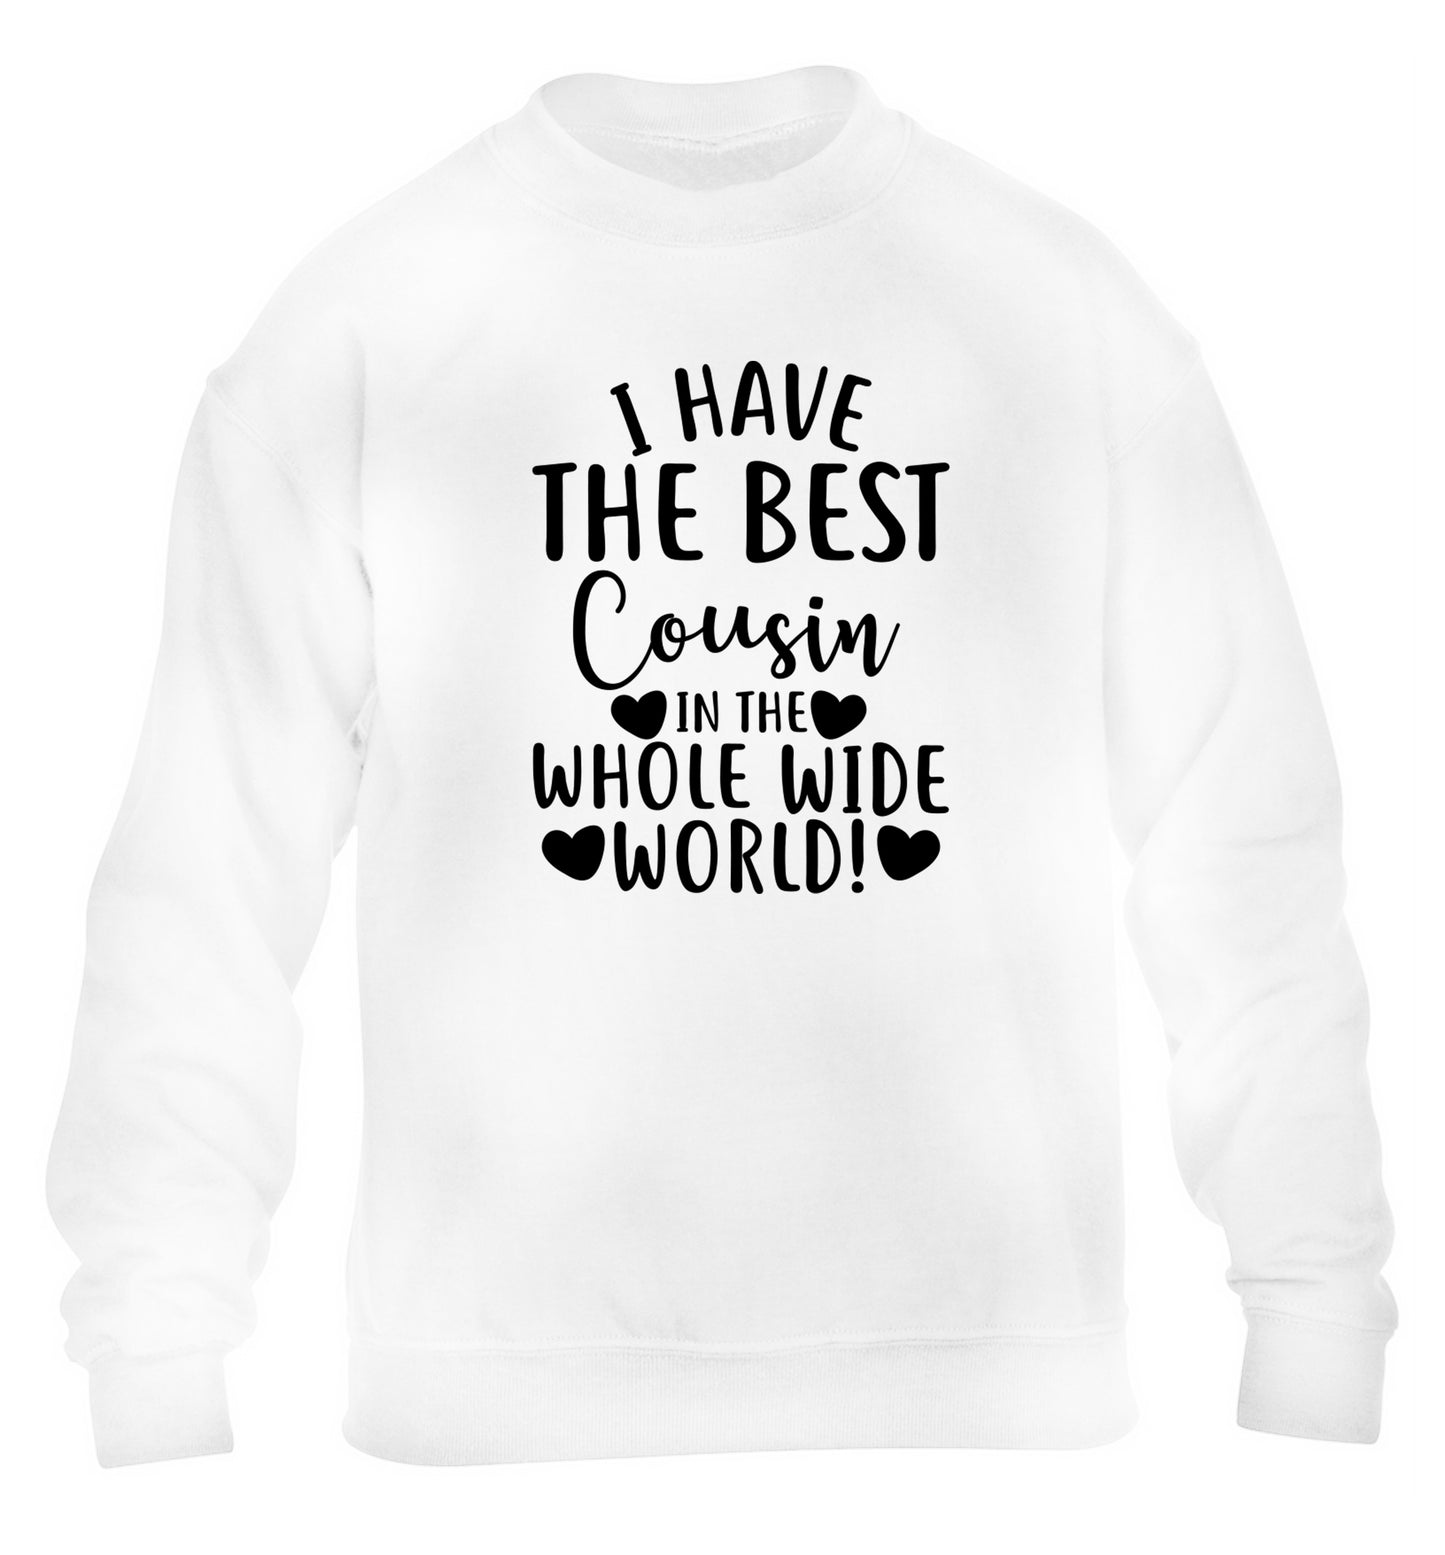 I have the best cousin in the whole wide world! children's white sweater 12-13 Years